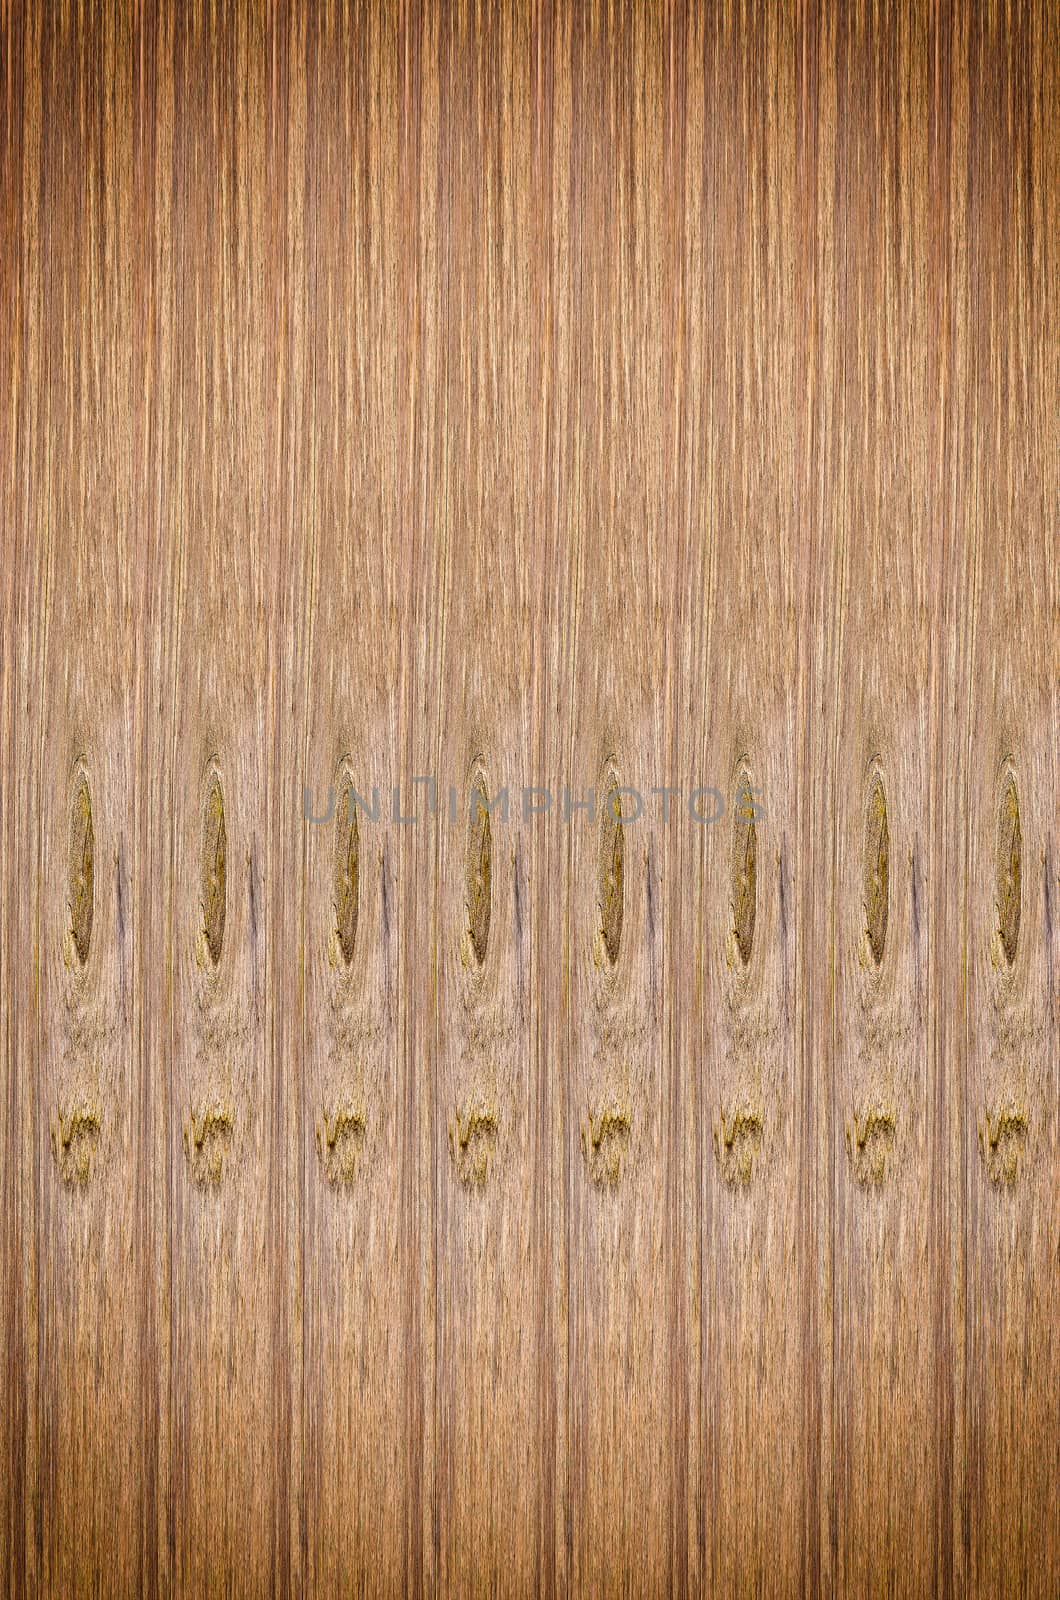 wood texture background in vintage light